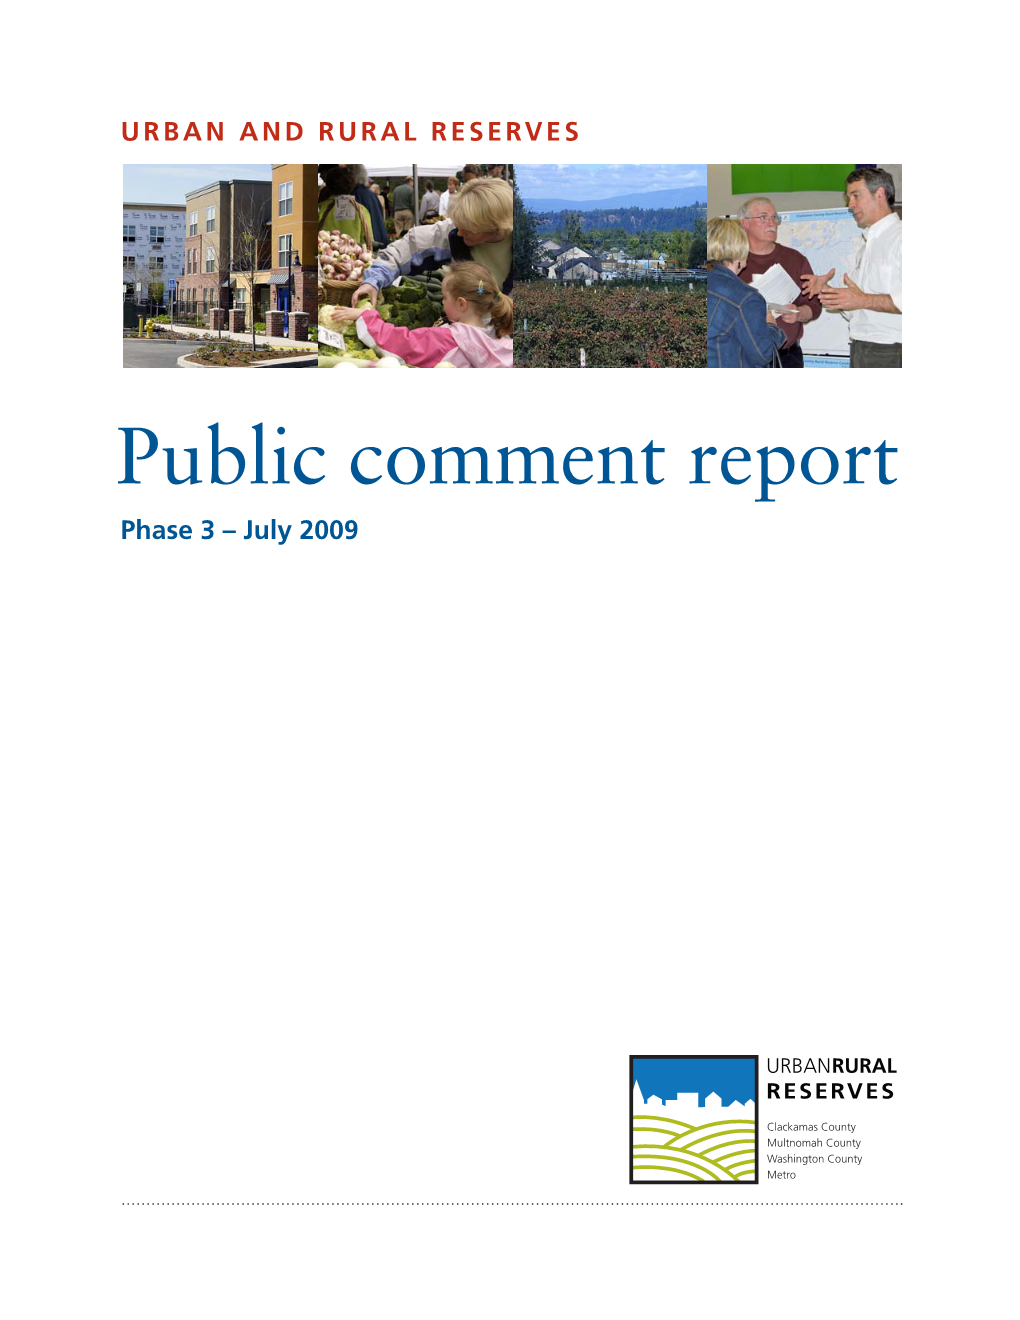 Urban and Rural Reserves Public Comment Report